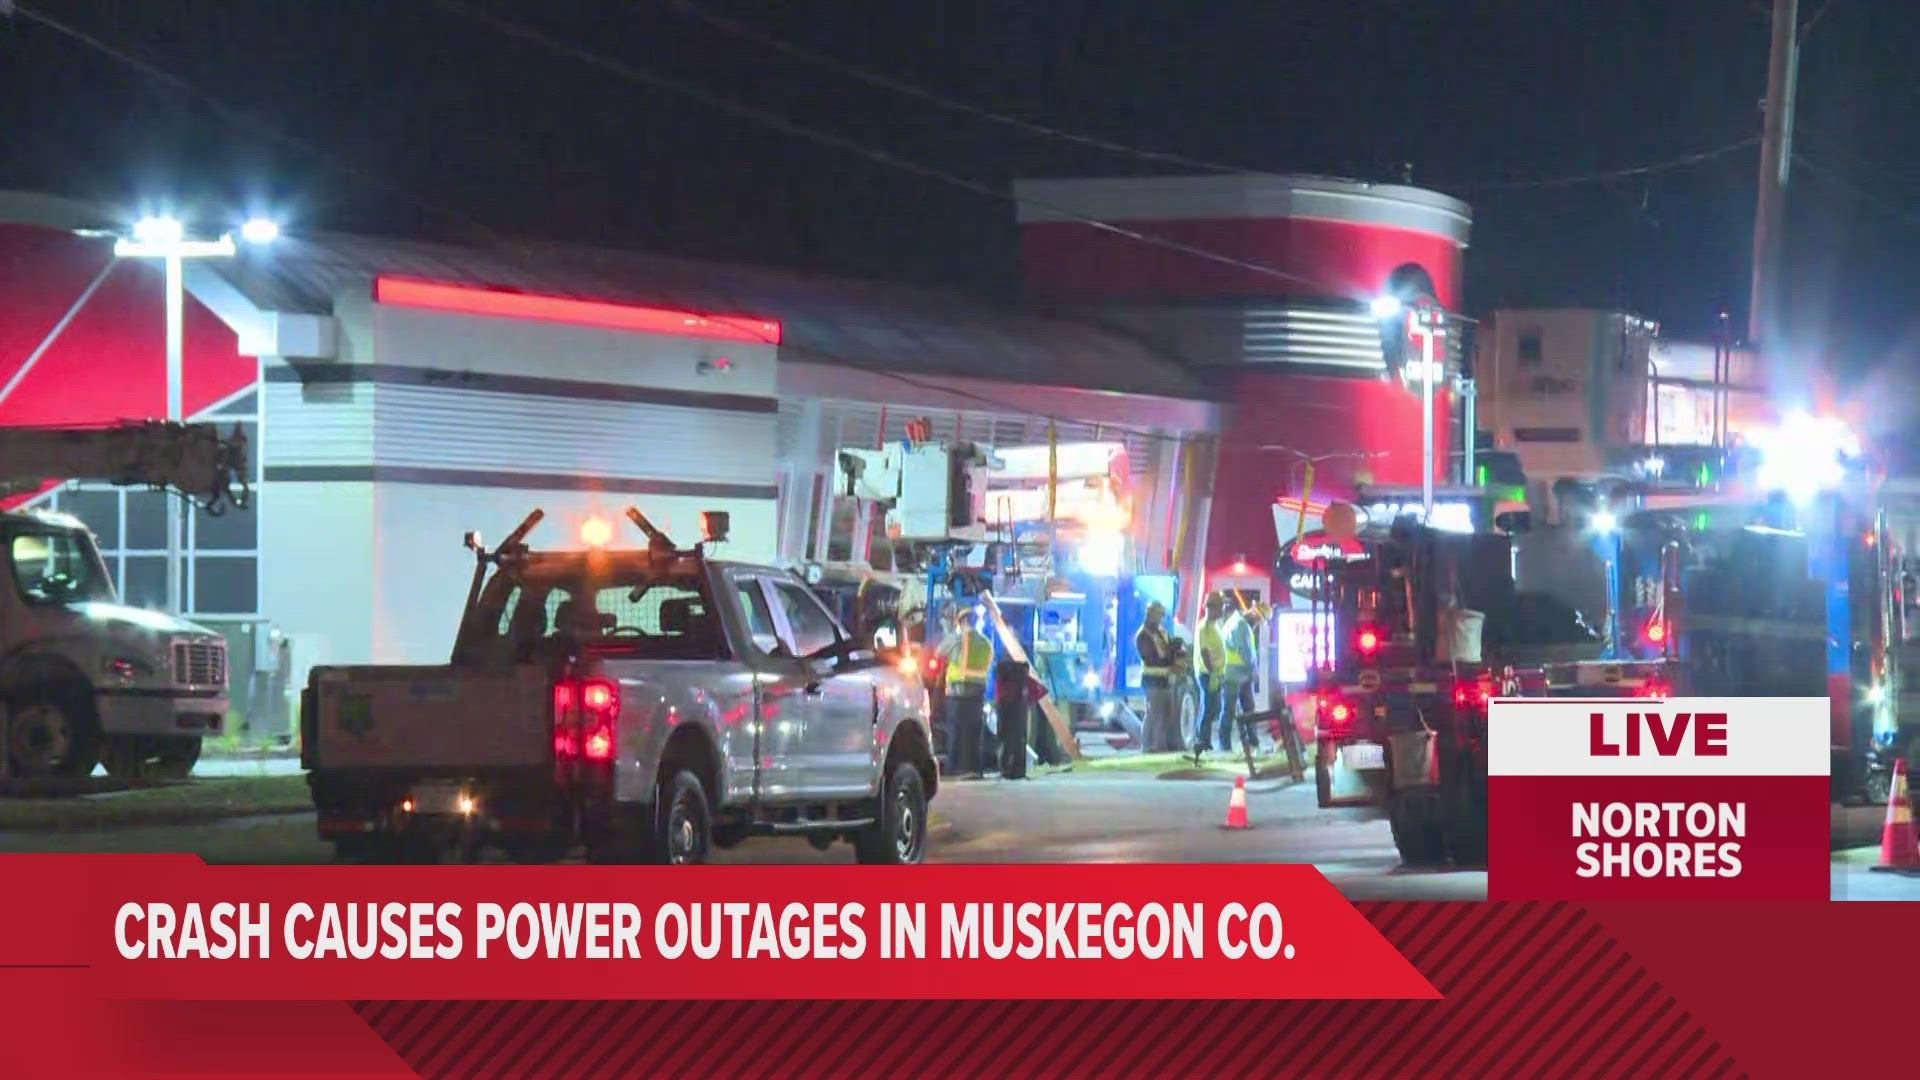 The crash knocked out power to customers in Norton Shores, Roosevelt Park and Muskegon Heights.